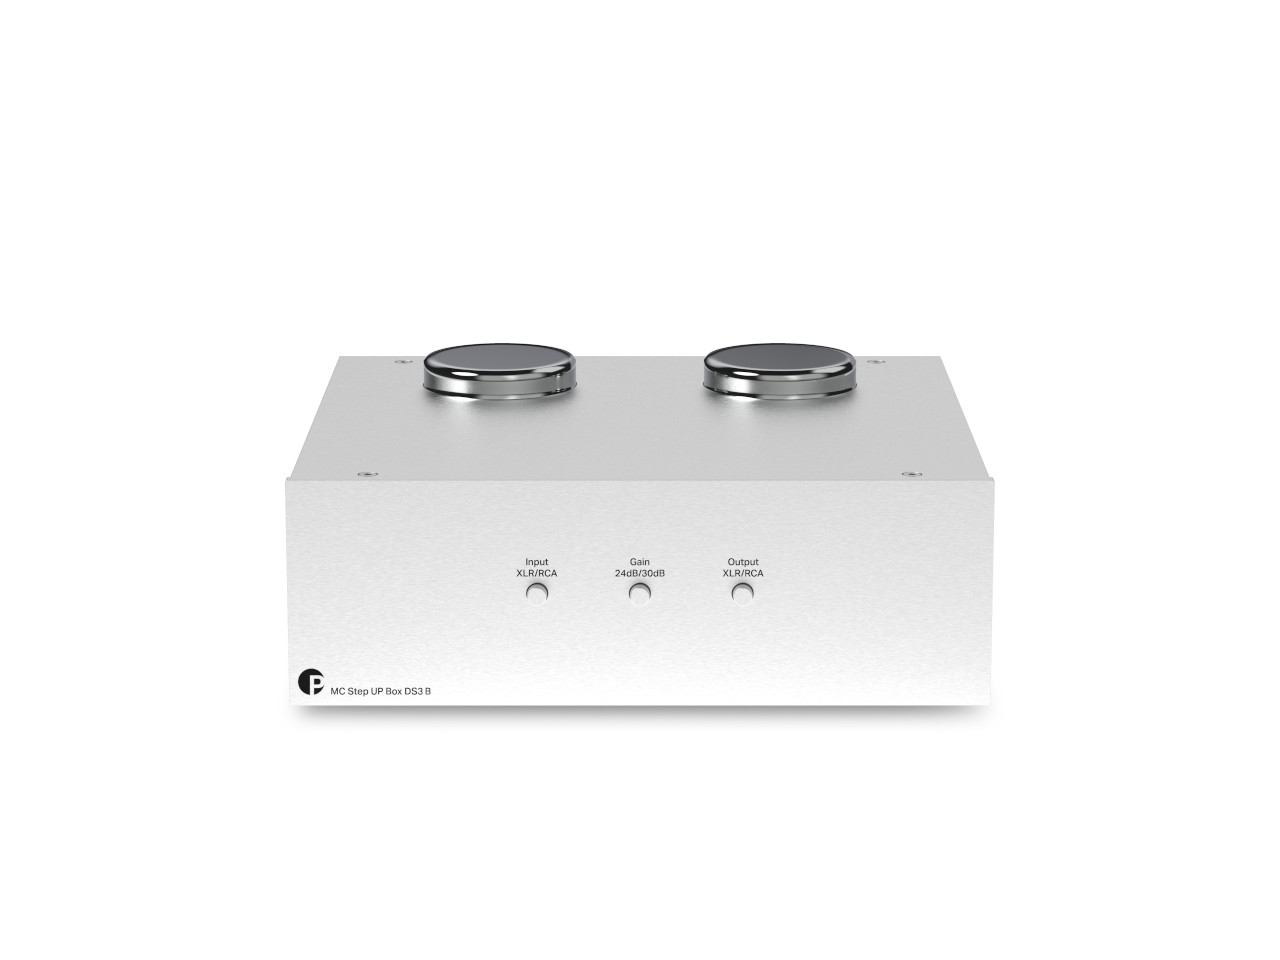 Pro-Ject MC Step Up Box DS3 B Silber